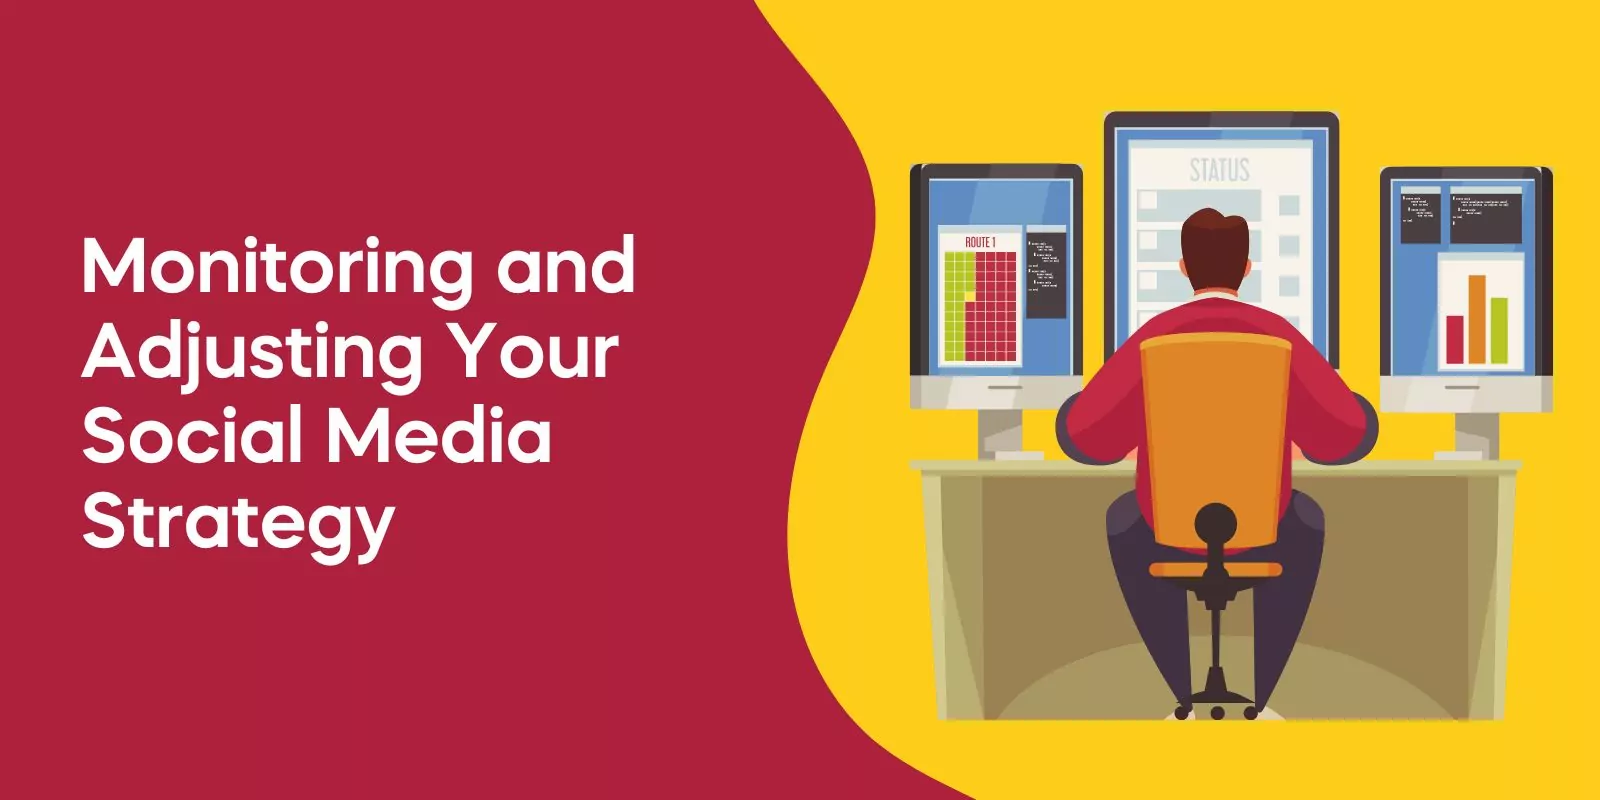 Monitoring and Adjusting Your Social Media Strategy